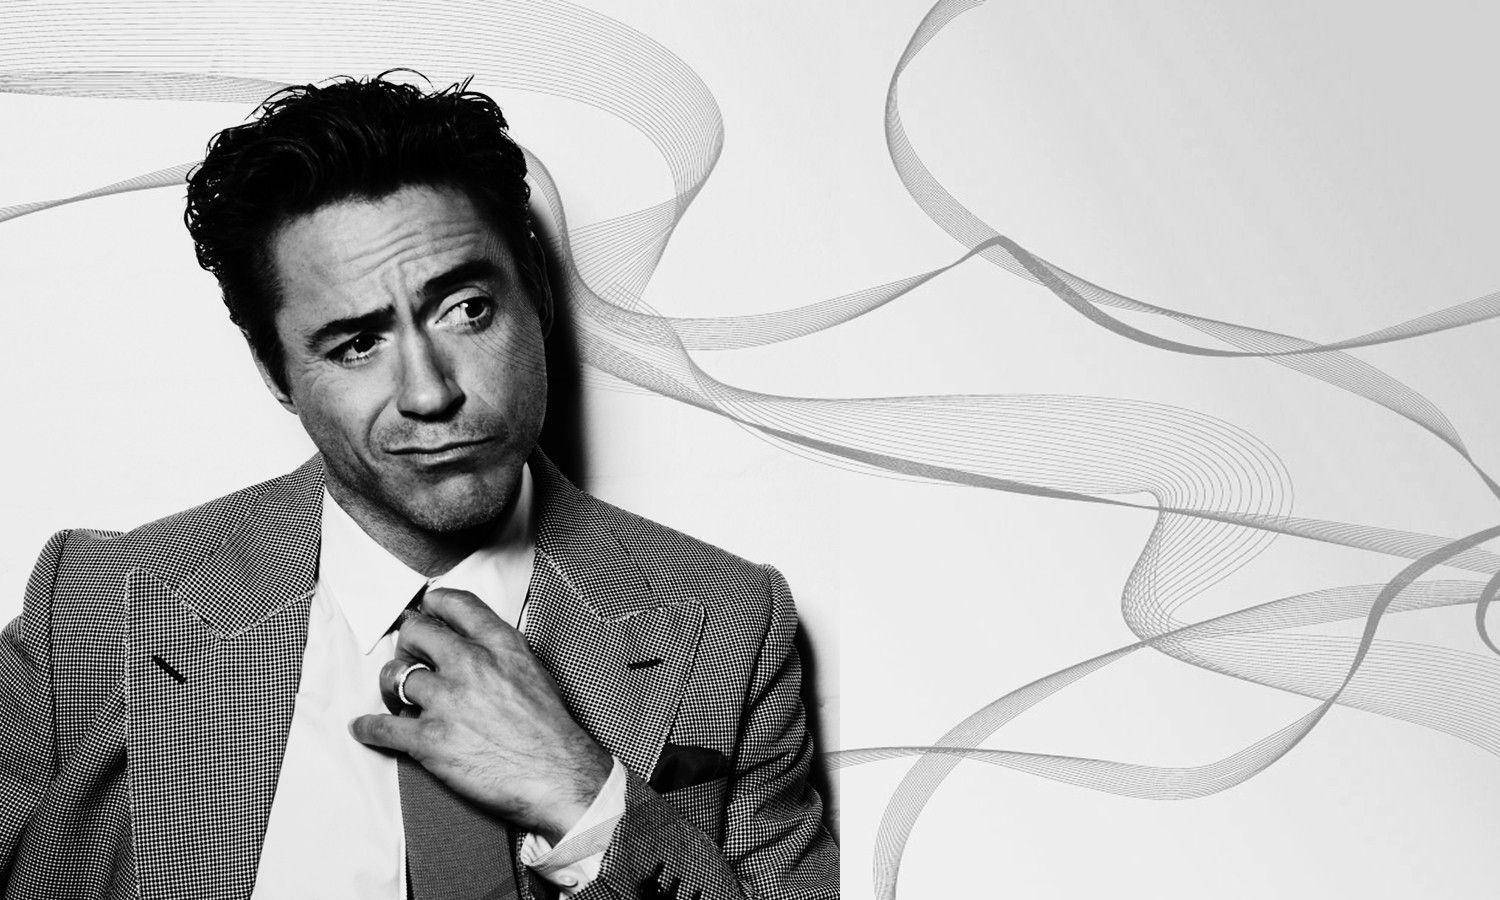 Robert Downey Jr Looking Dapper In A Suit And Tie Background